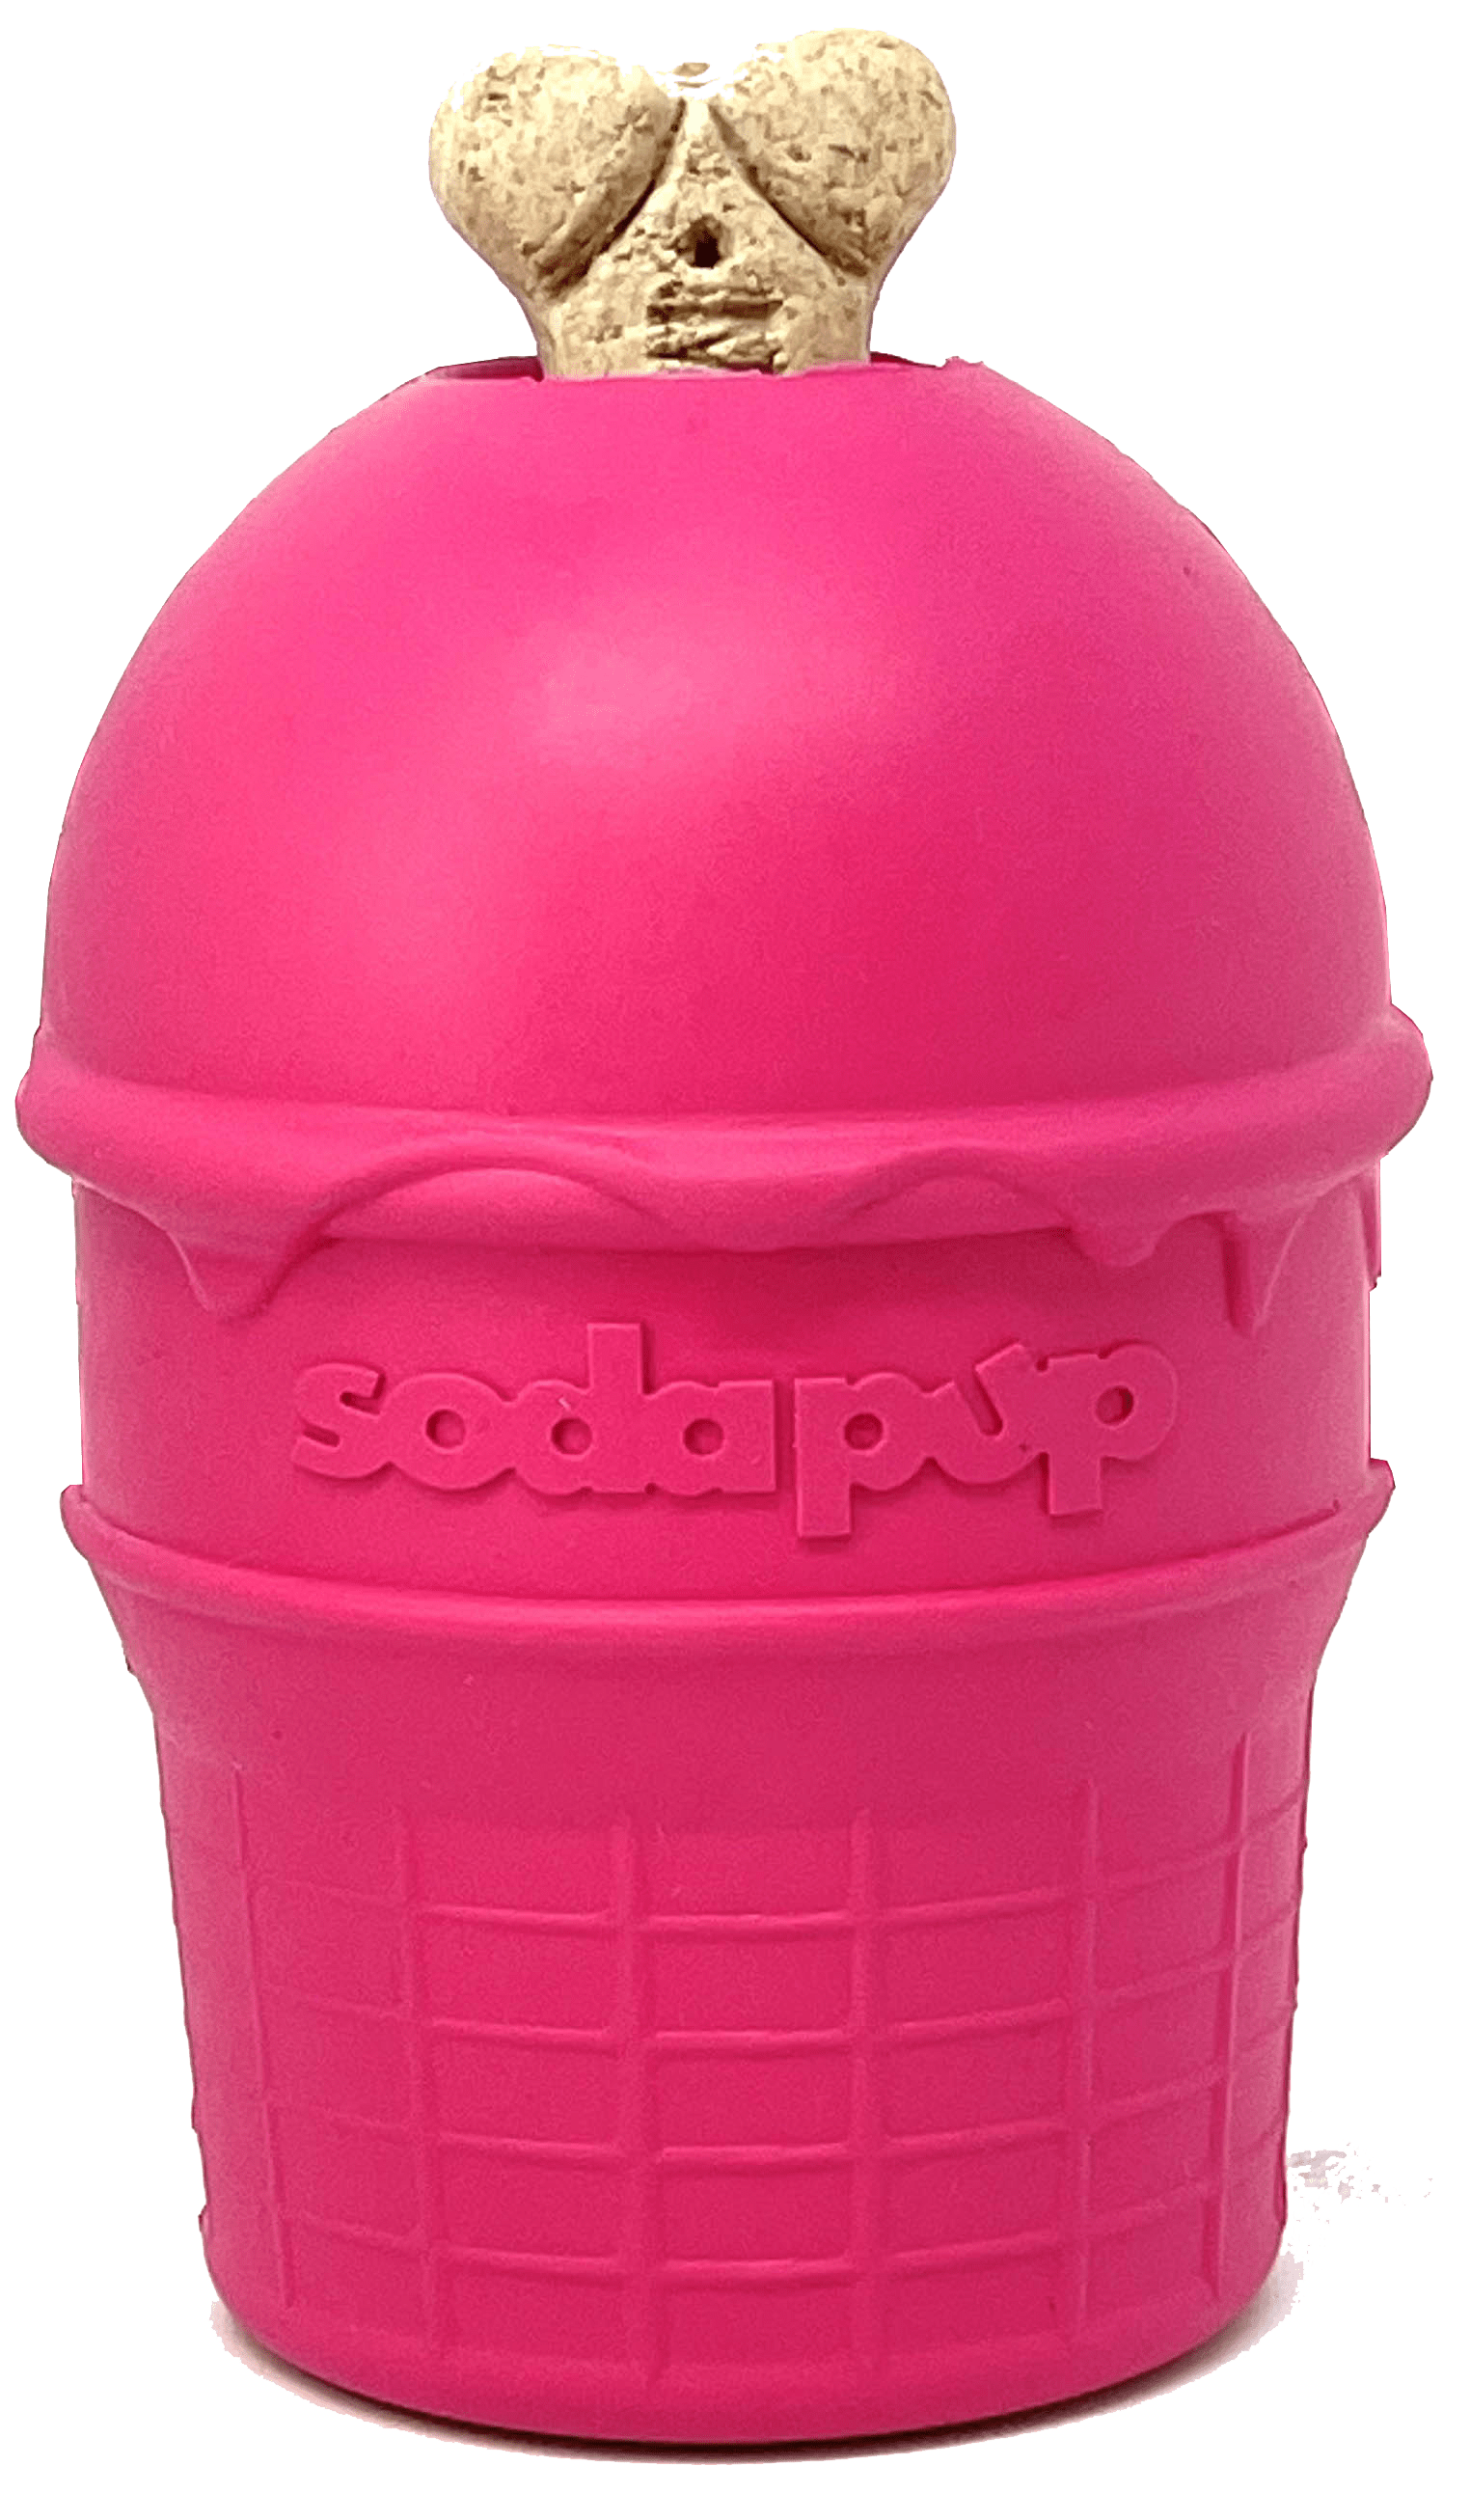 SodaPup Puppy Can Toy Medium Pink